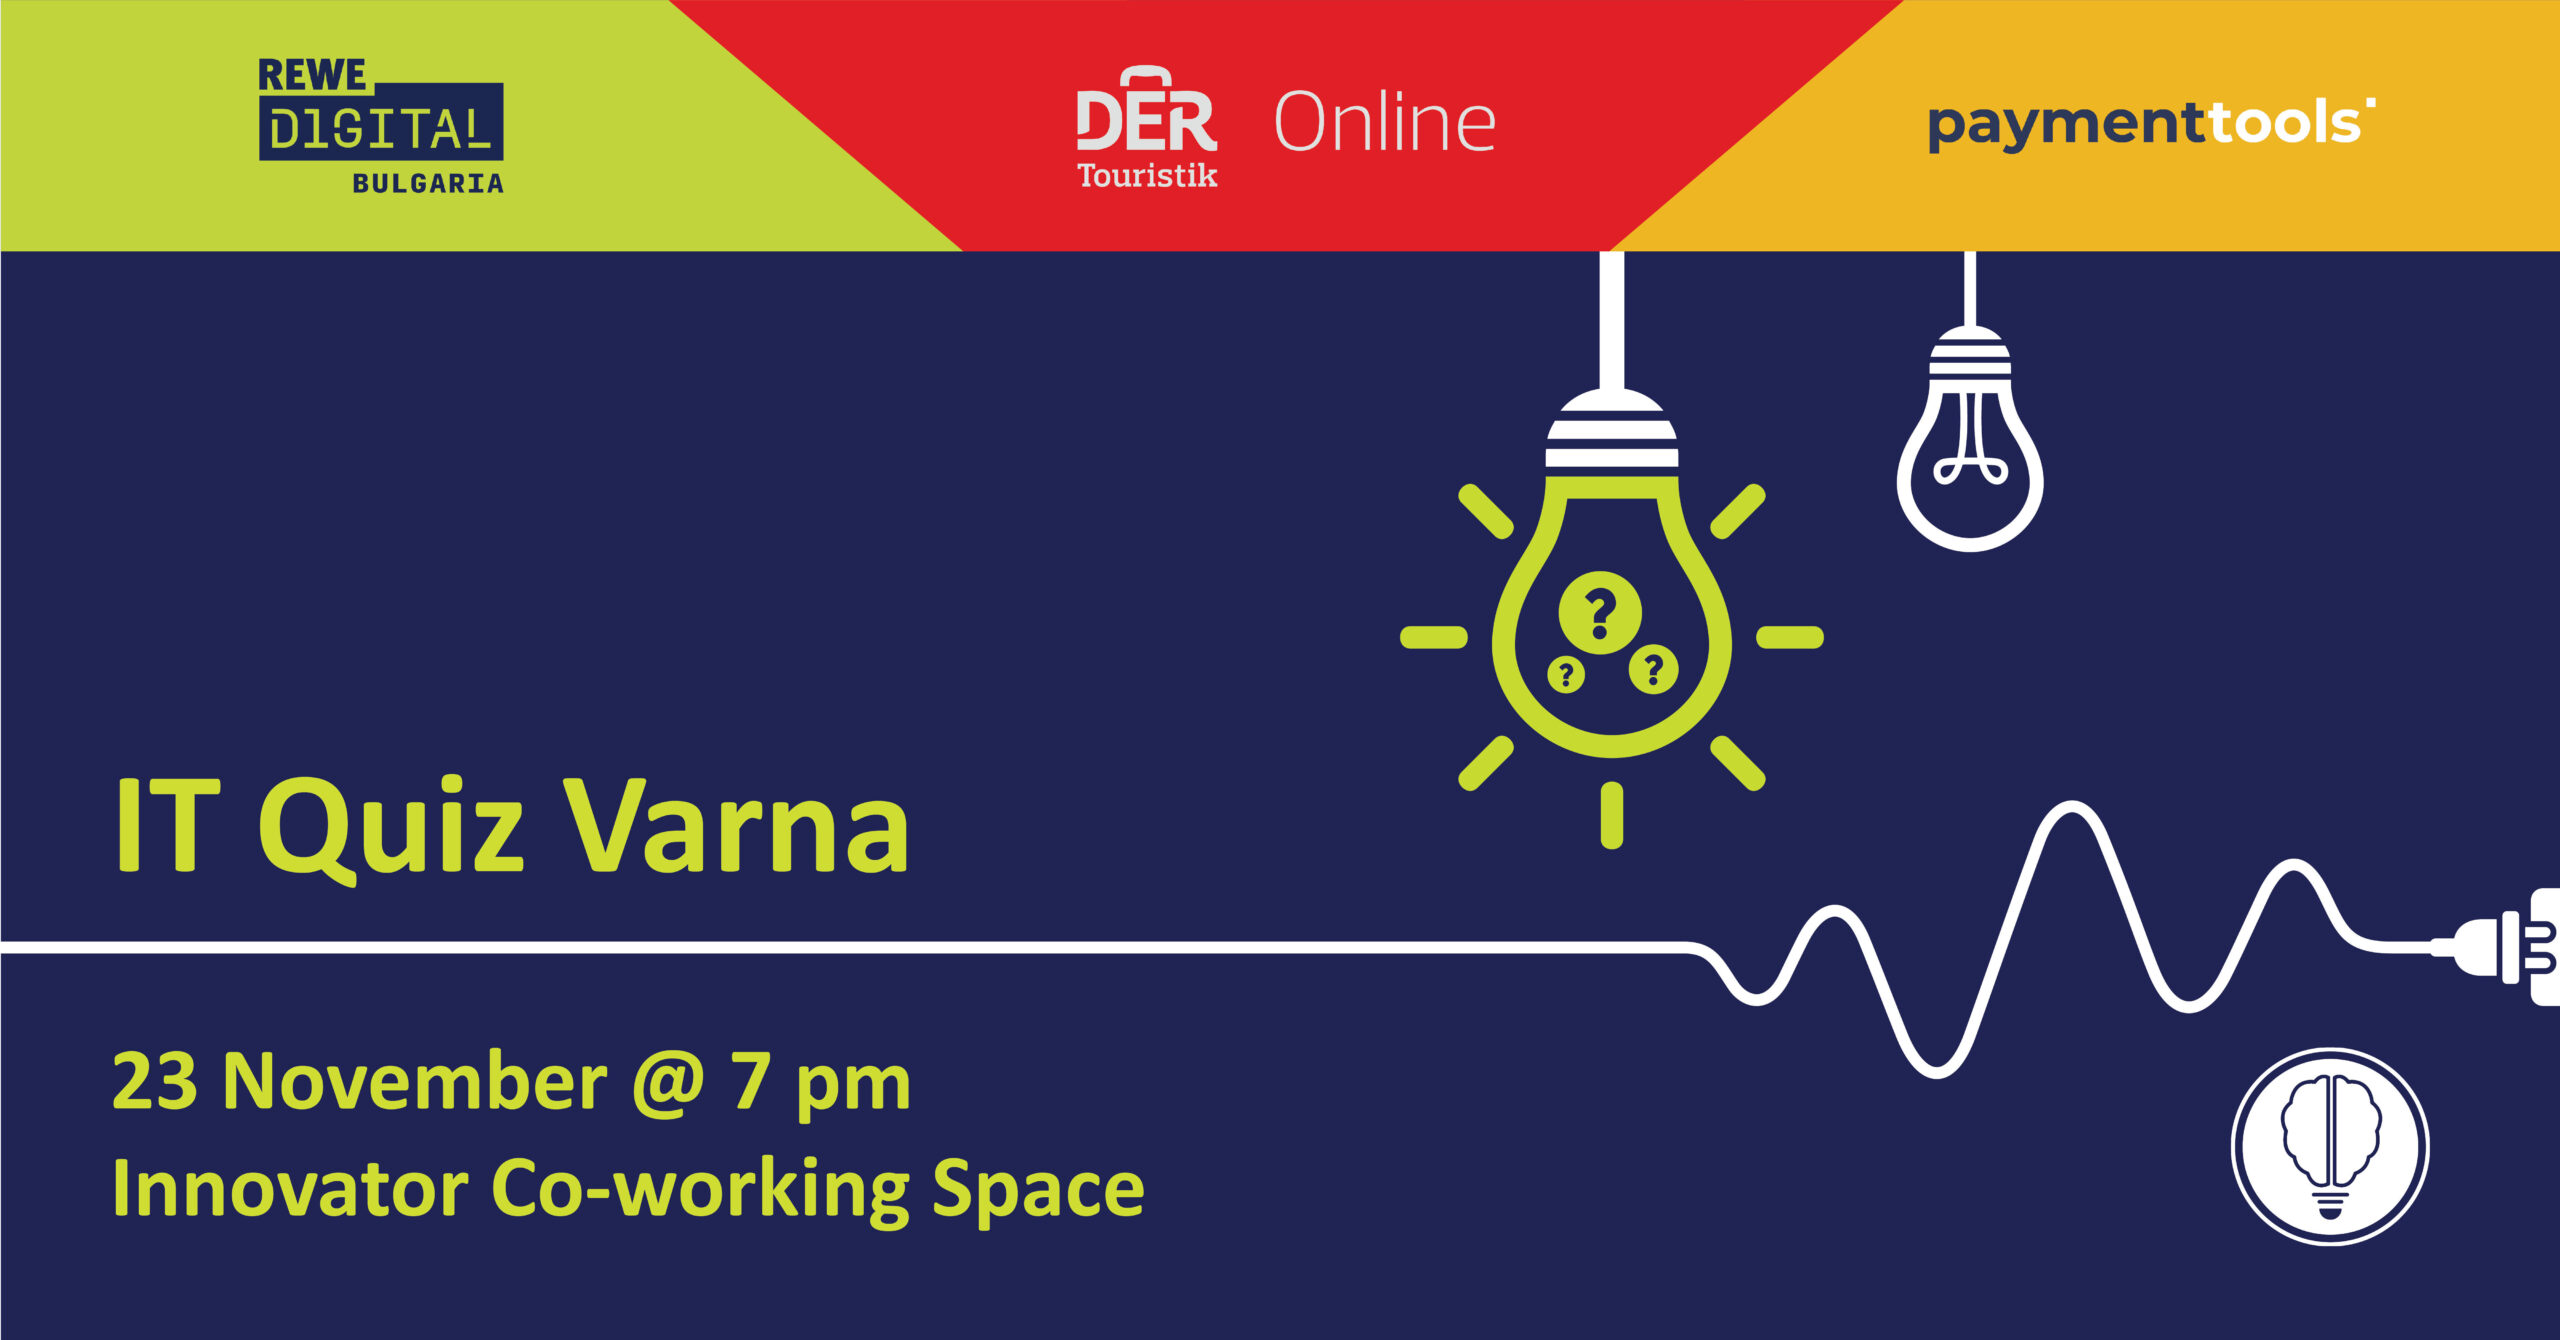 [CANCELLED] IT Quiz by REWE digital Bulgaria 17 | Innovator Coworking Space